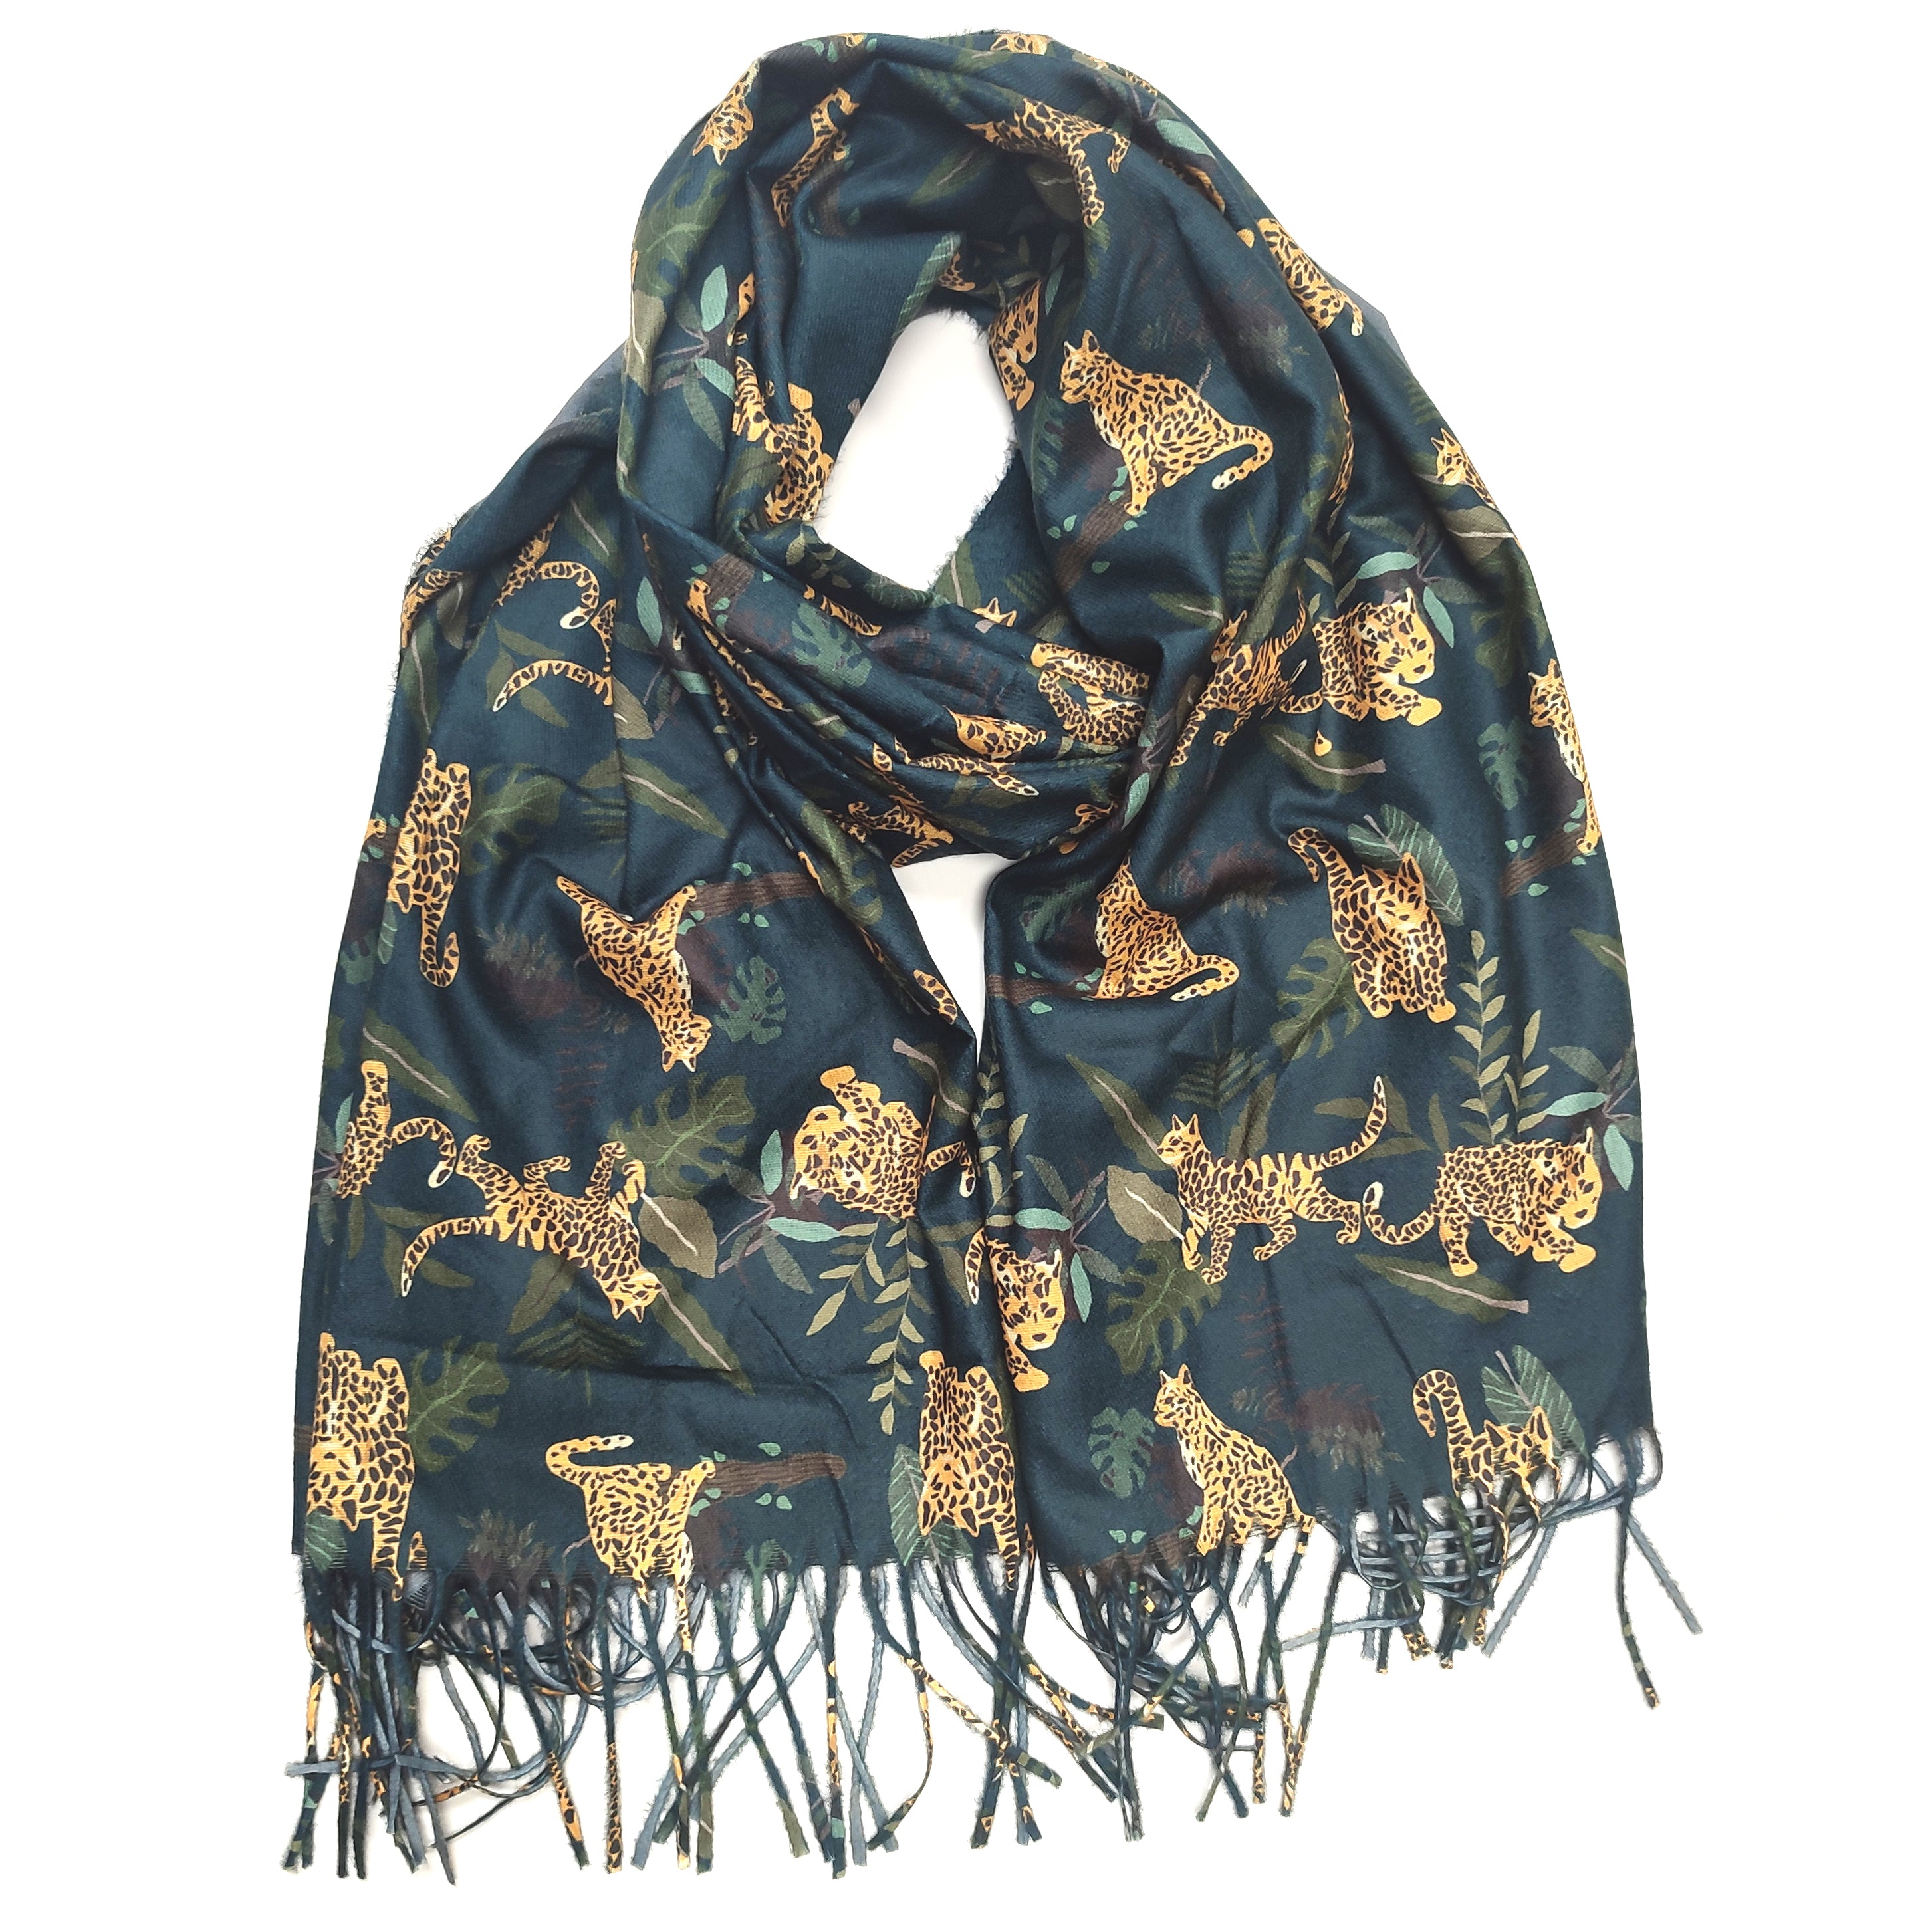 Midnight Jungle Pashmina Style Scarf - Exclusive Design - Teal/Black